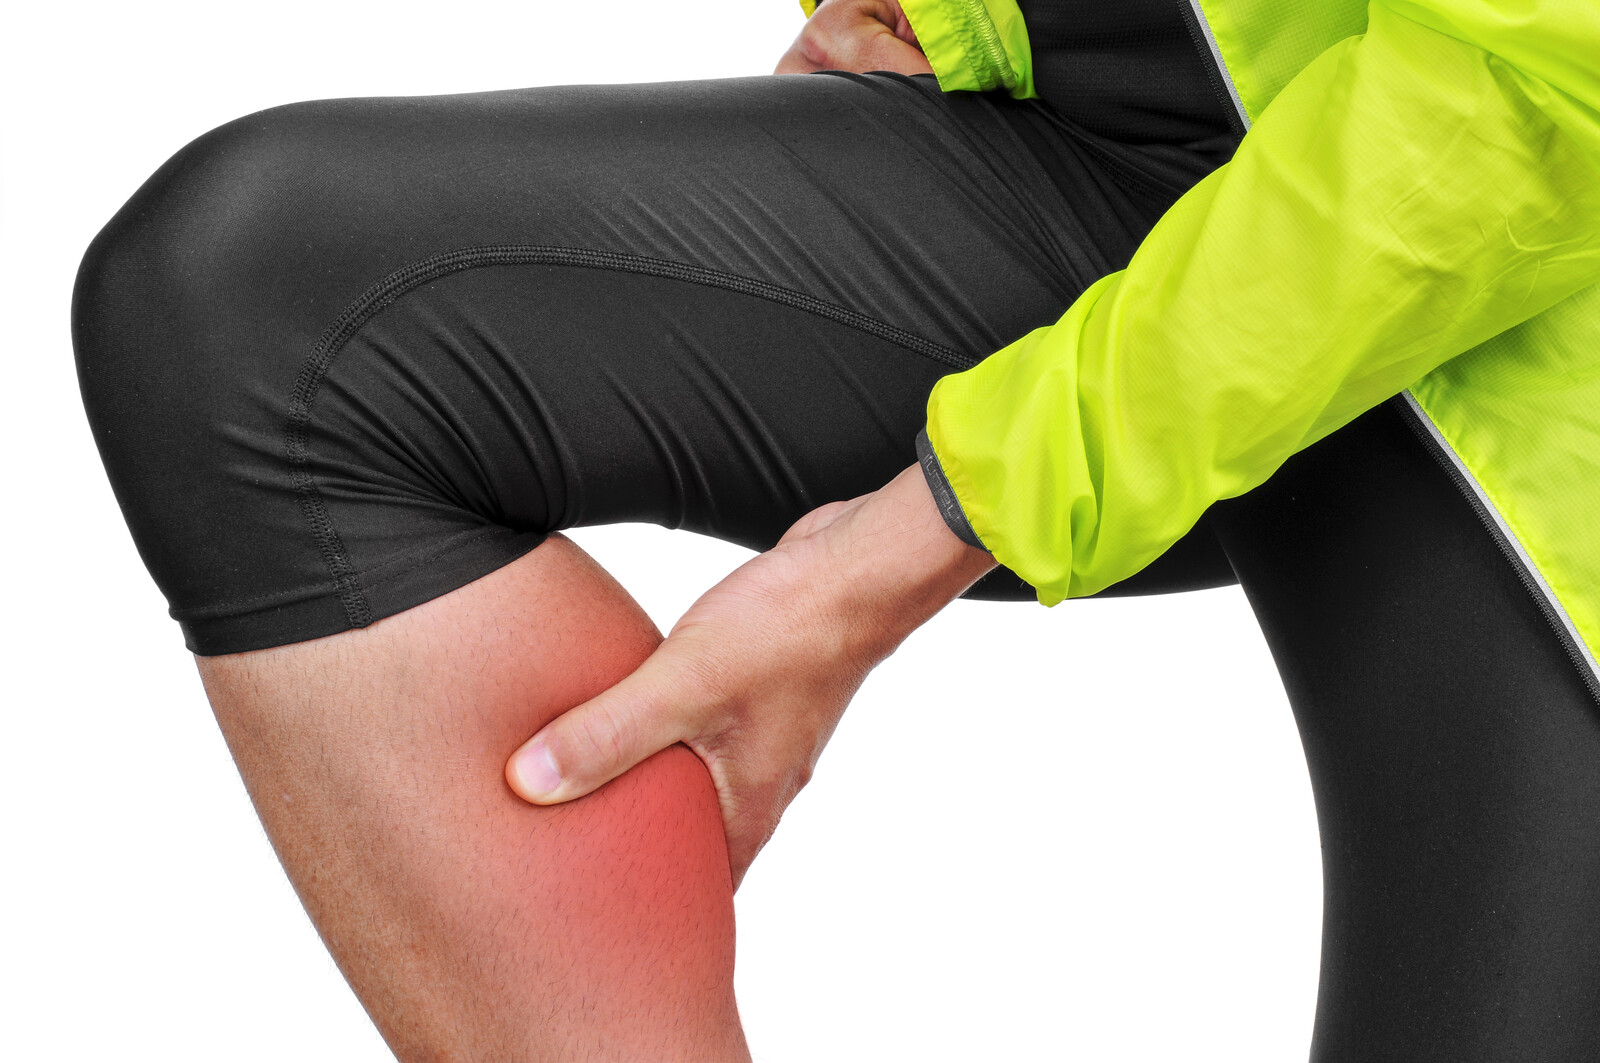 COVID Restrictions and Return to Sport Injuries